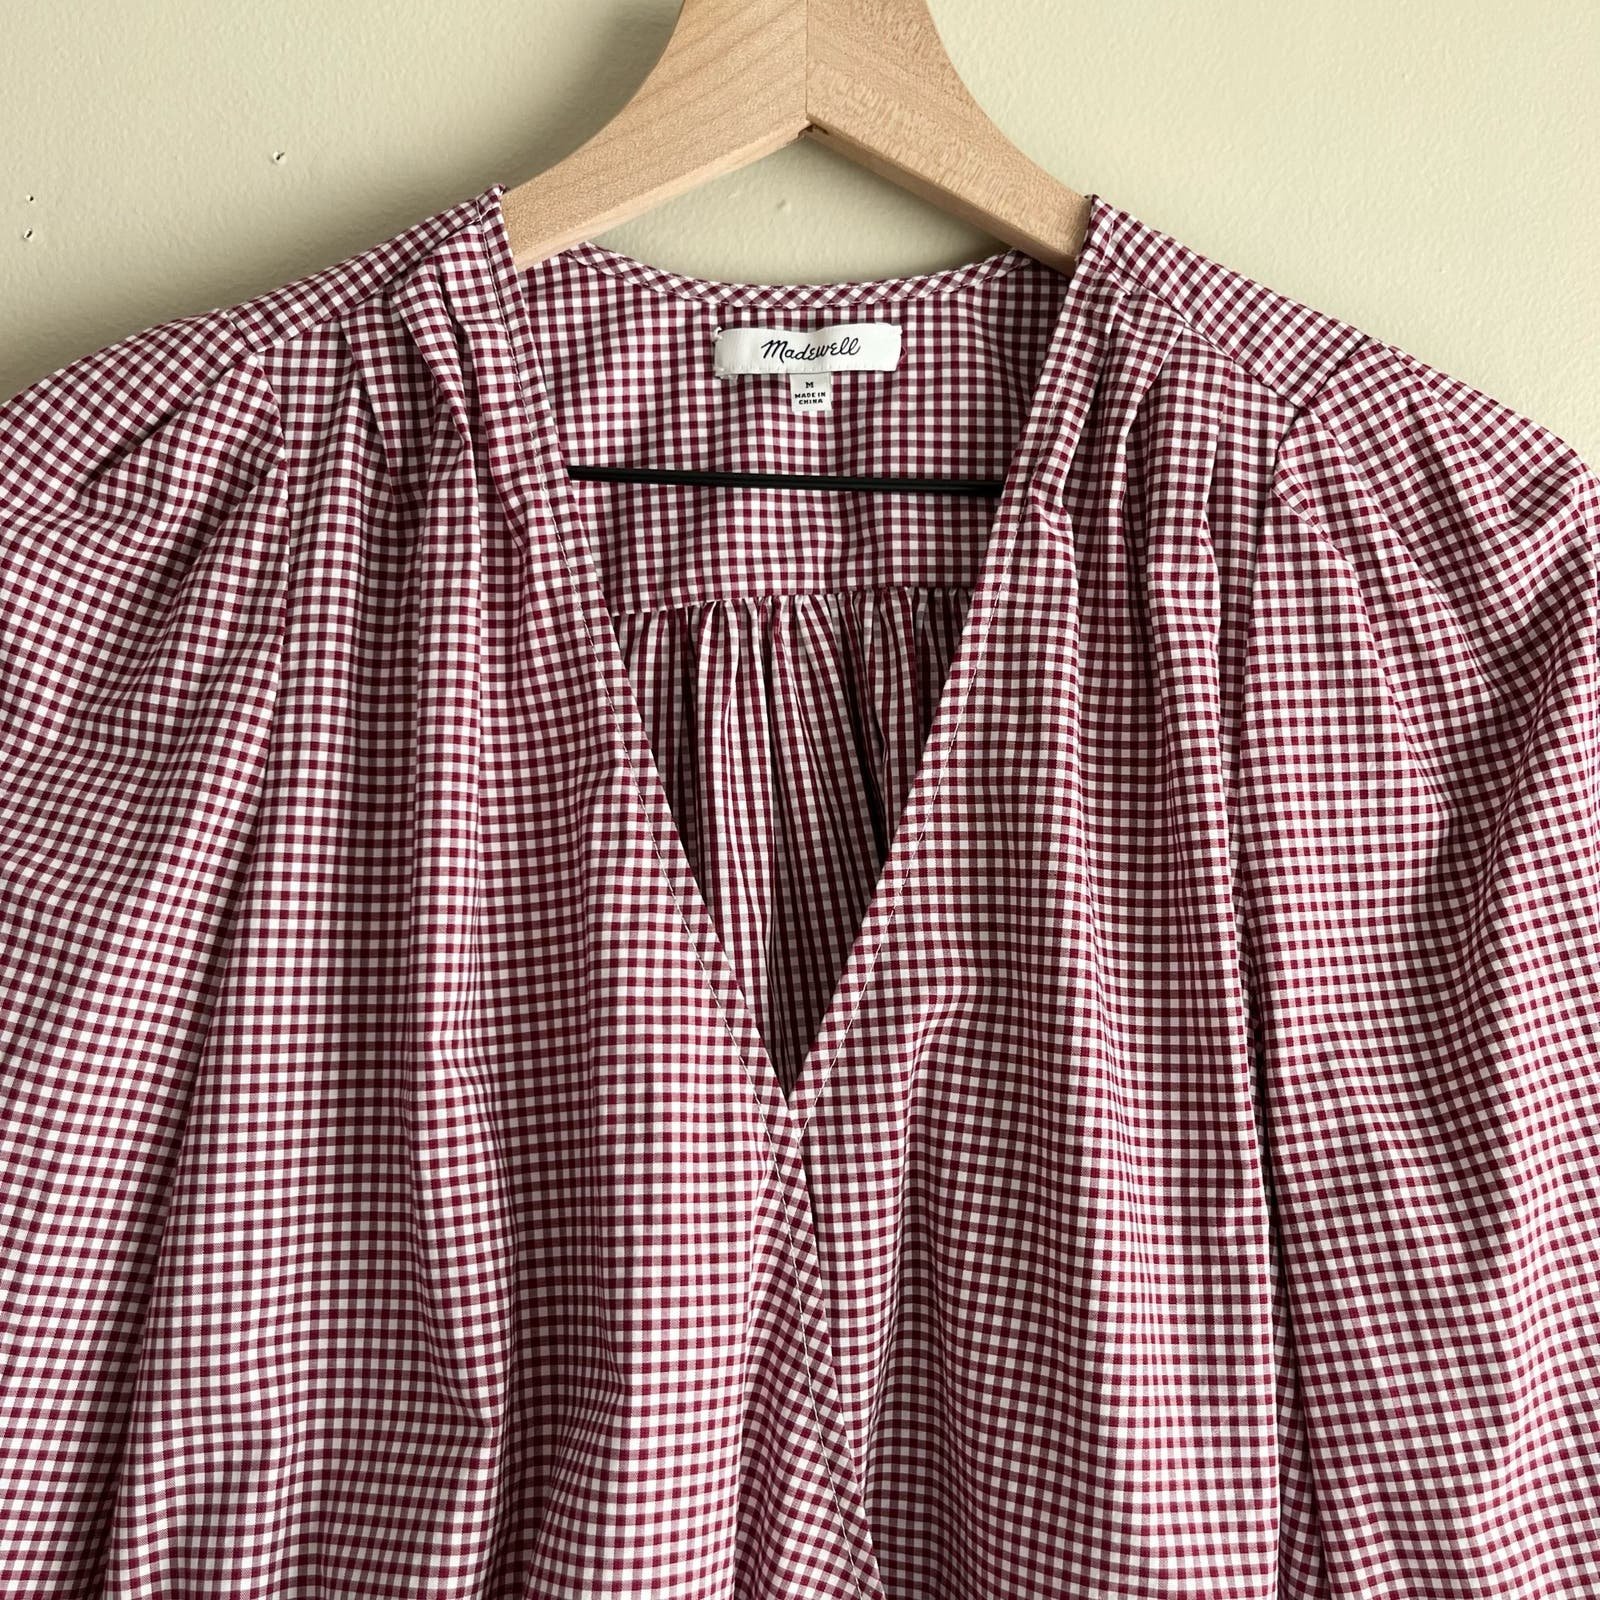 Affordable NWOT Madewell Tie-Waist 3/4 Sleeve Wrap Top in Gingham Check Red & White, Medium jgF66uQgB online store